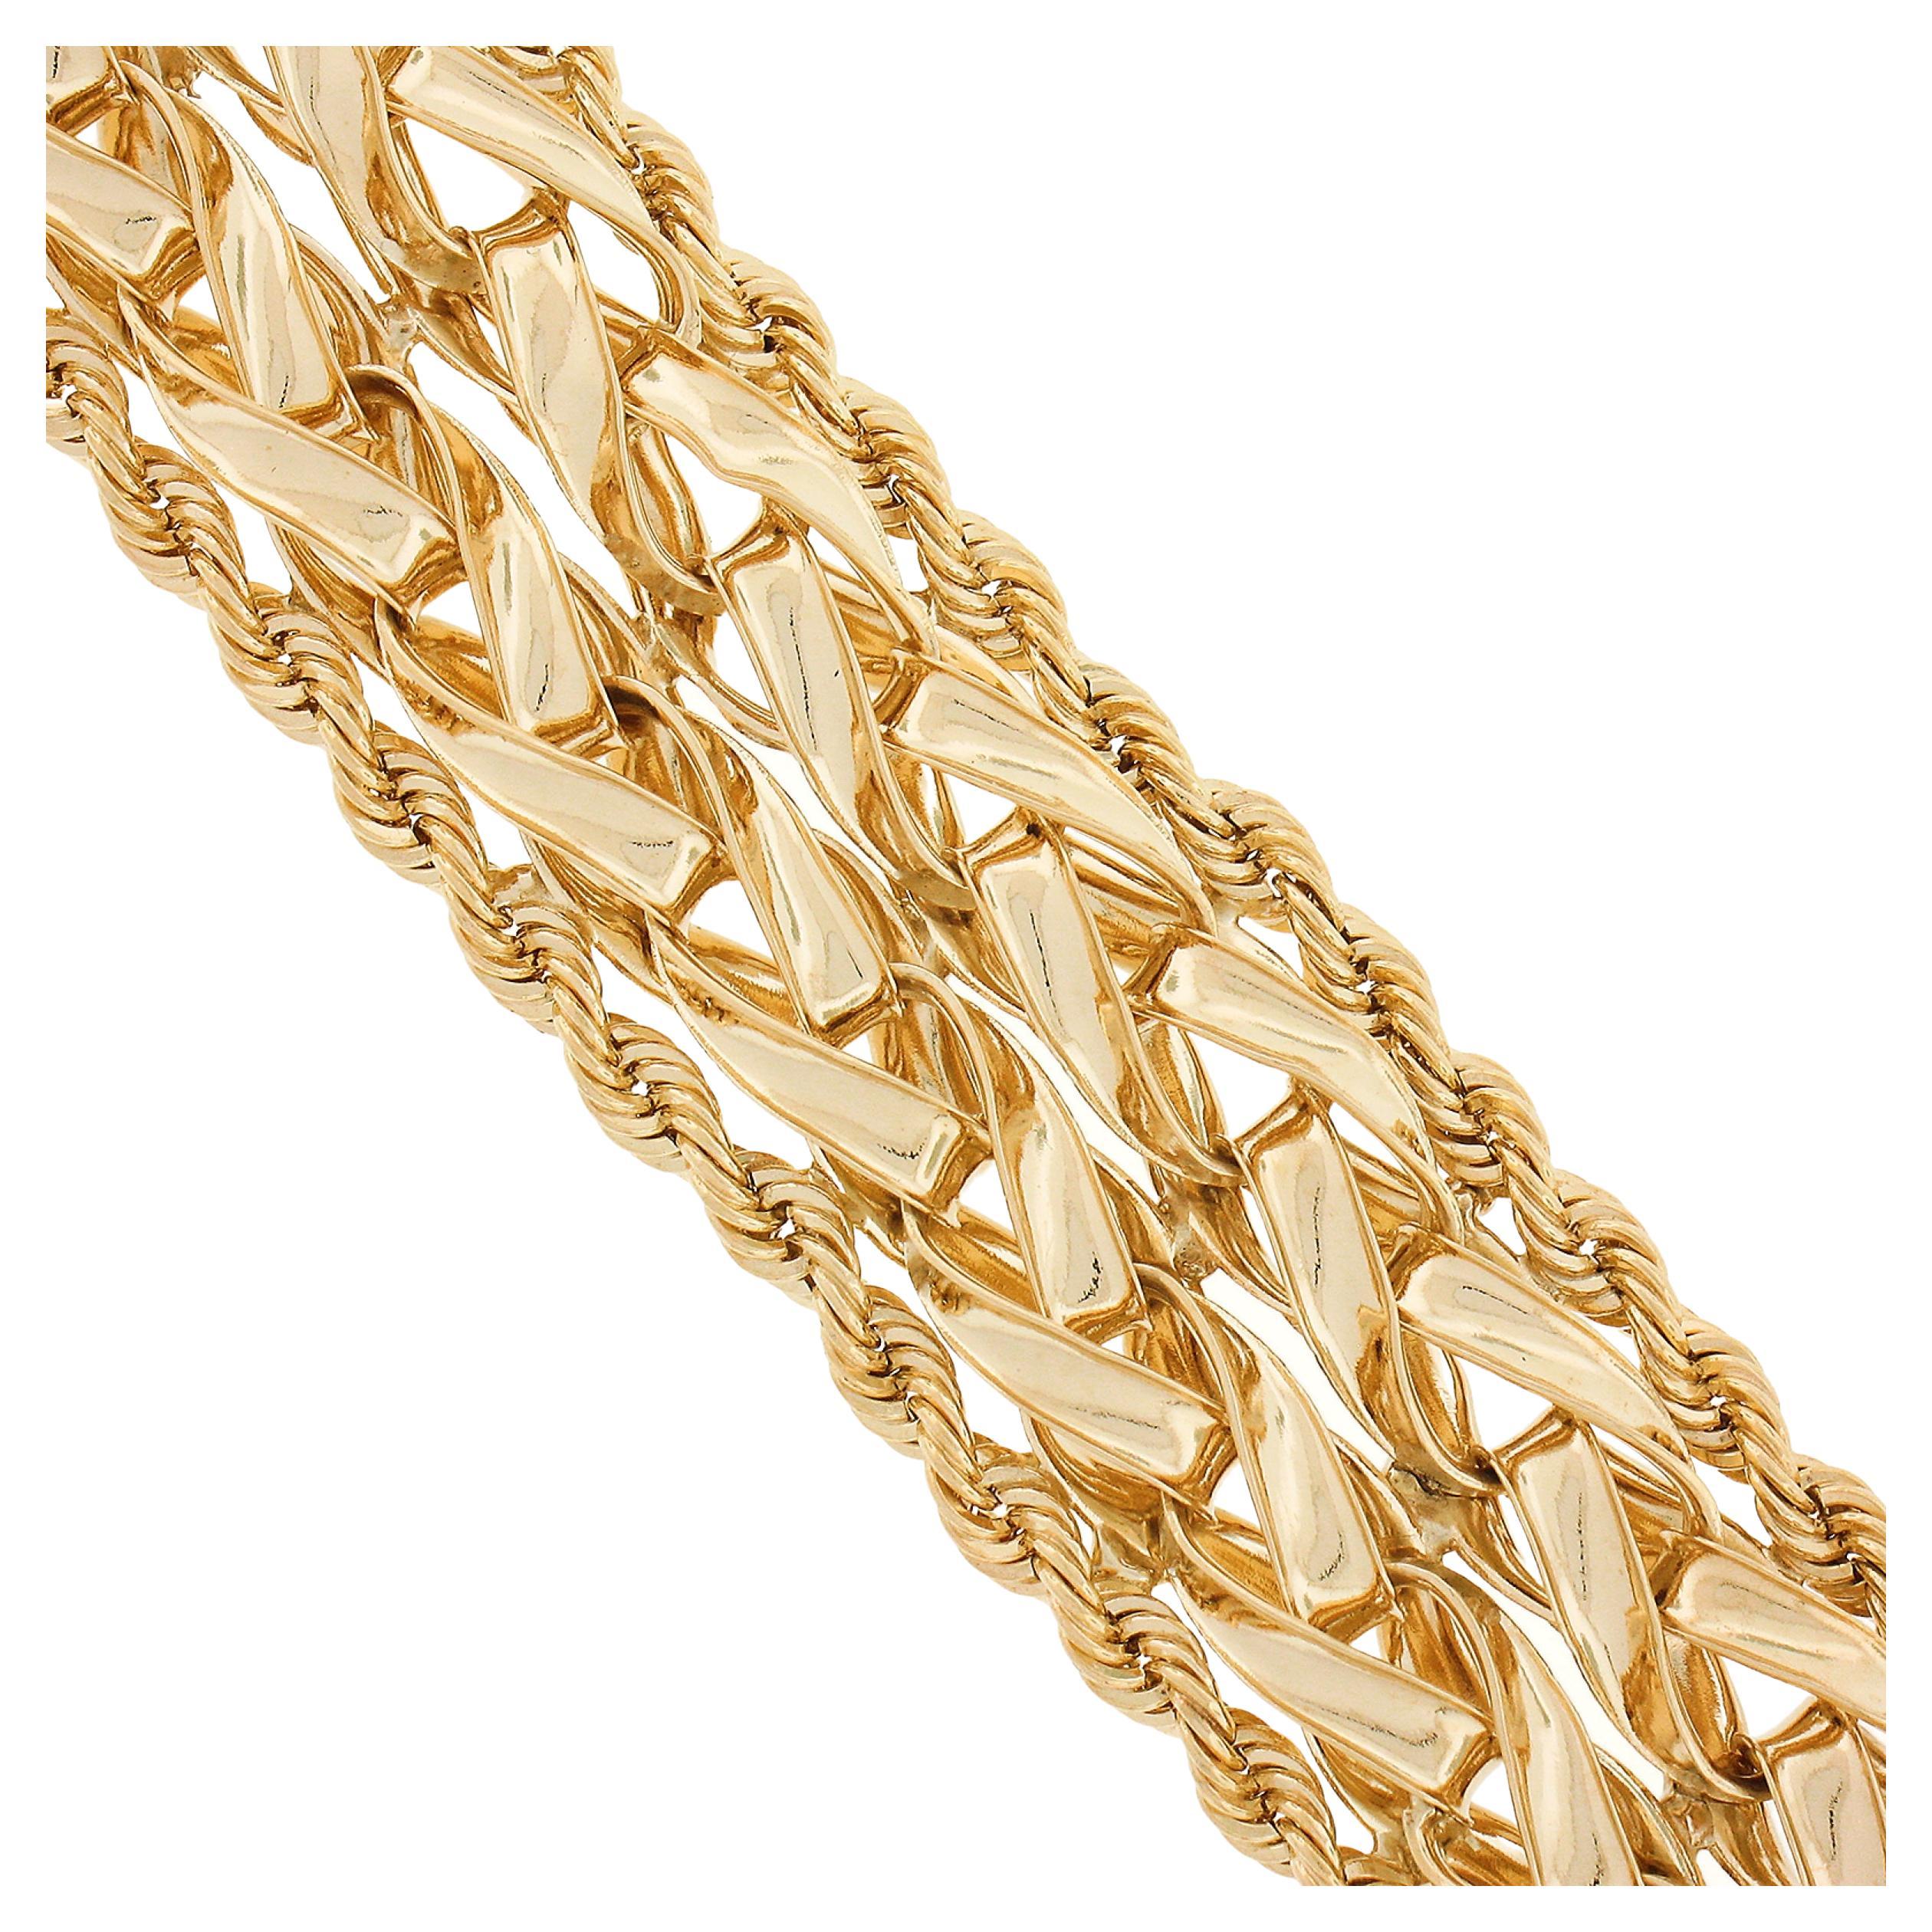 Vintage 14k Yellow Gold 20mm Wide Dual Braided Rope Link Chain 6" Strap Bracelet For Sale